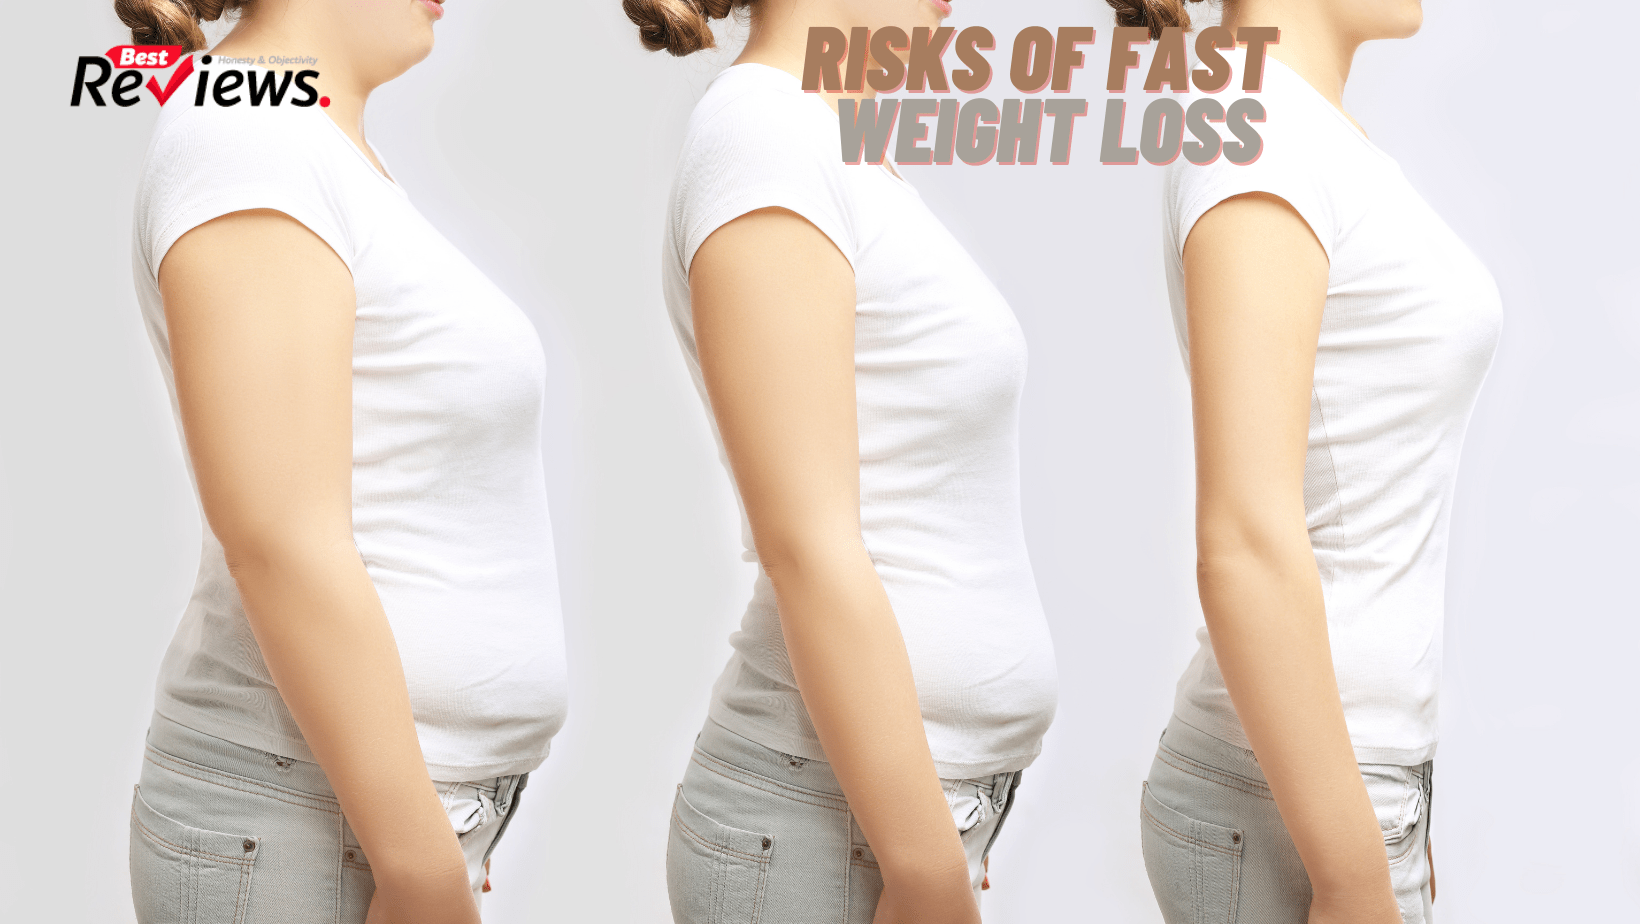 Risks of fast weight loss